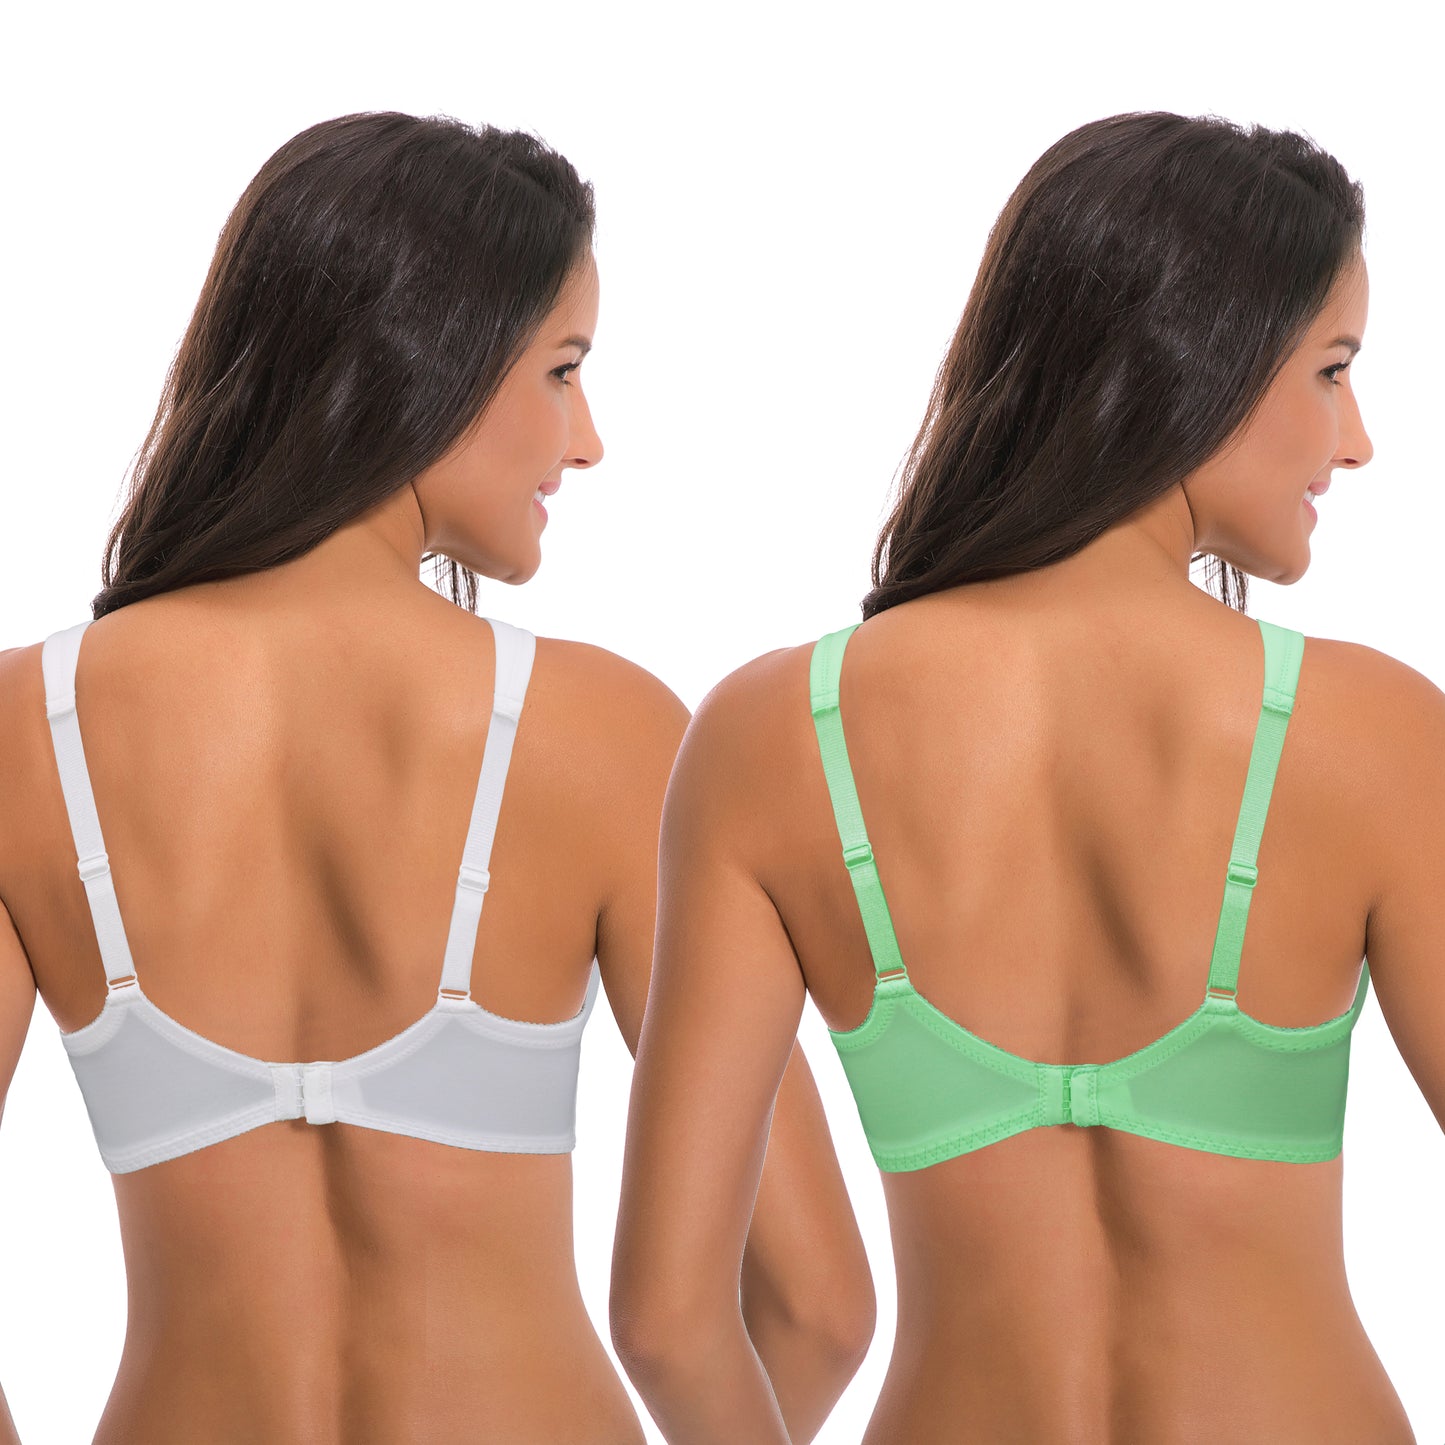 Women's Plus Size Unlined Underwire Lace Bra with Cushion Straps-2PK-WHITE,GREEN